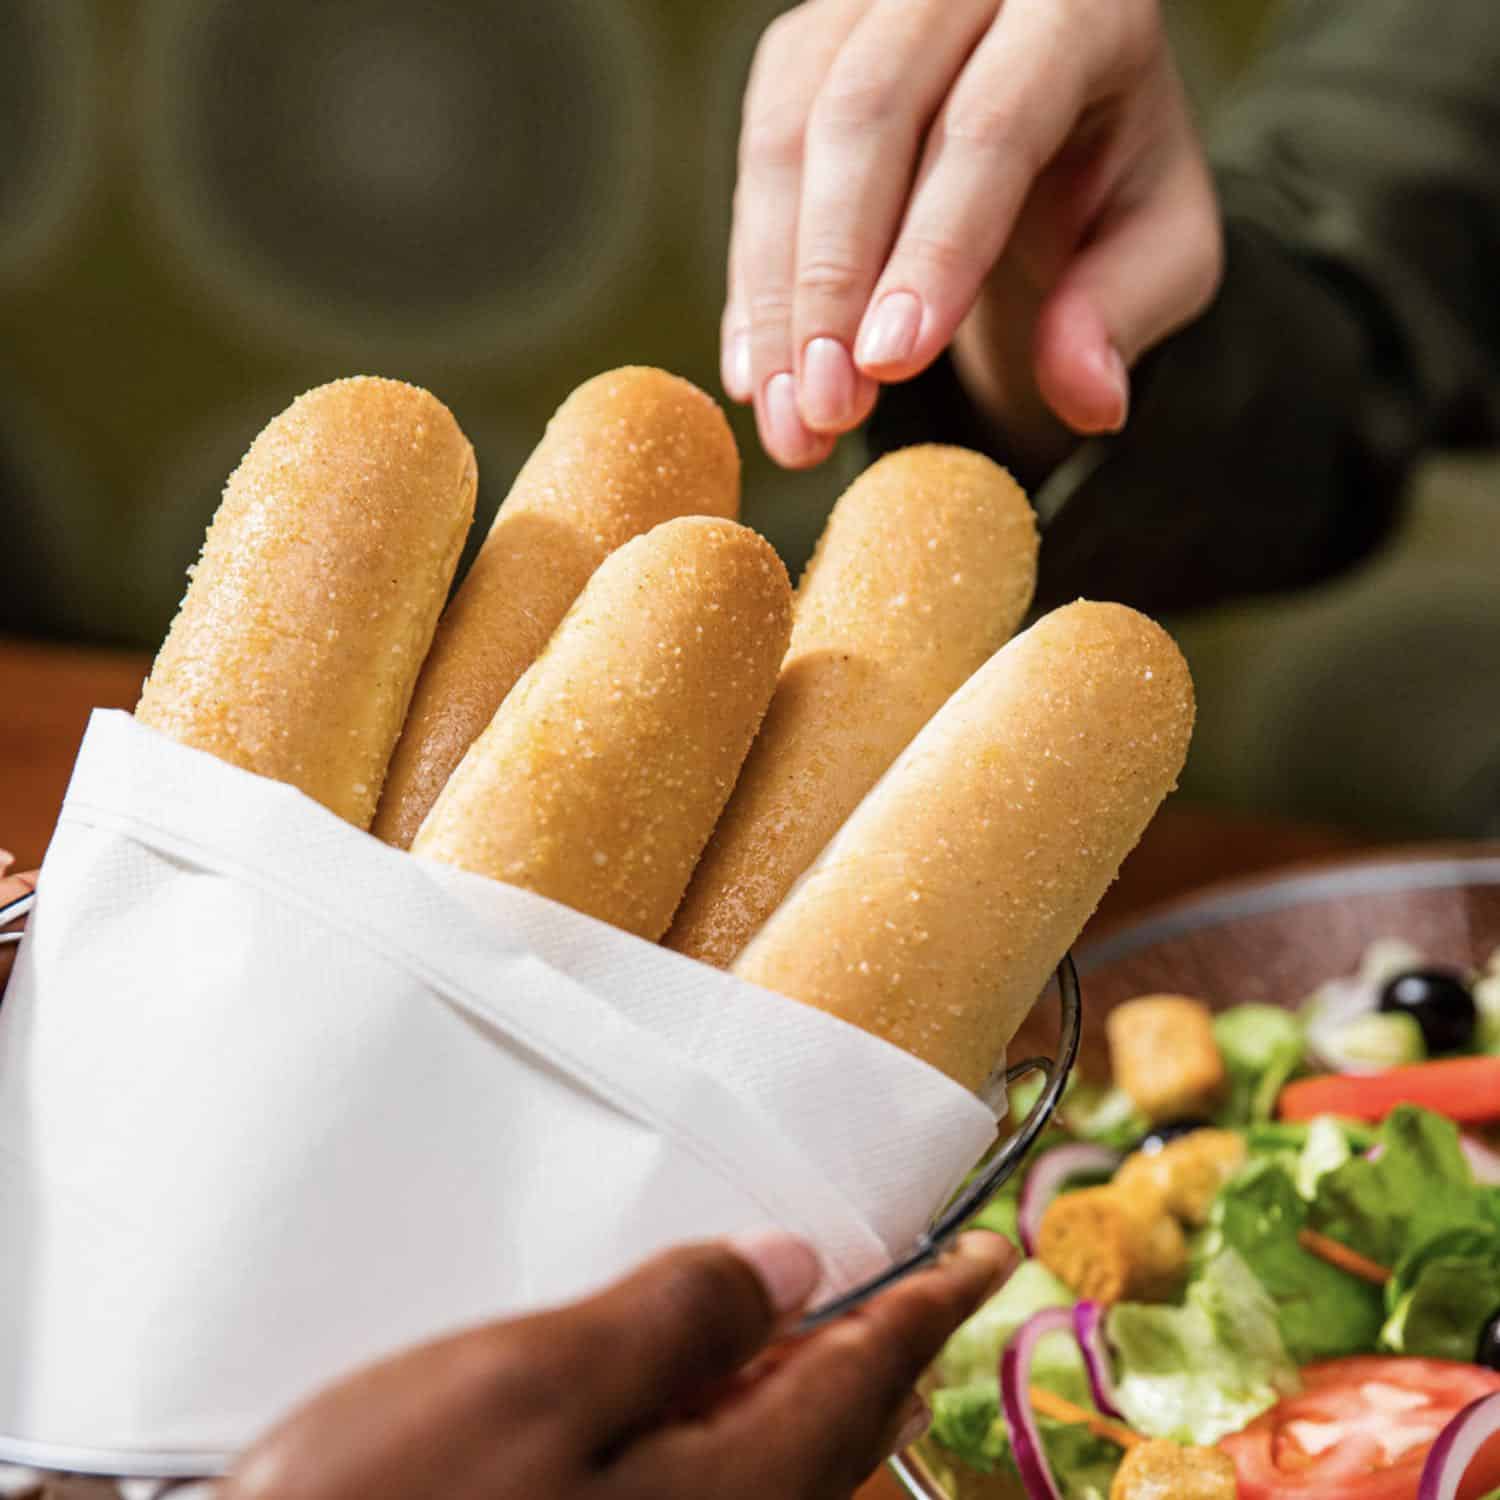 Do online Olive Garden orders come with breadsticks